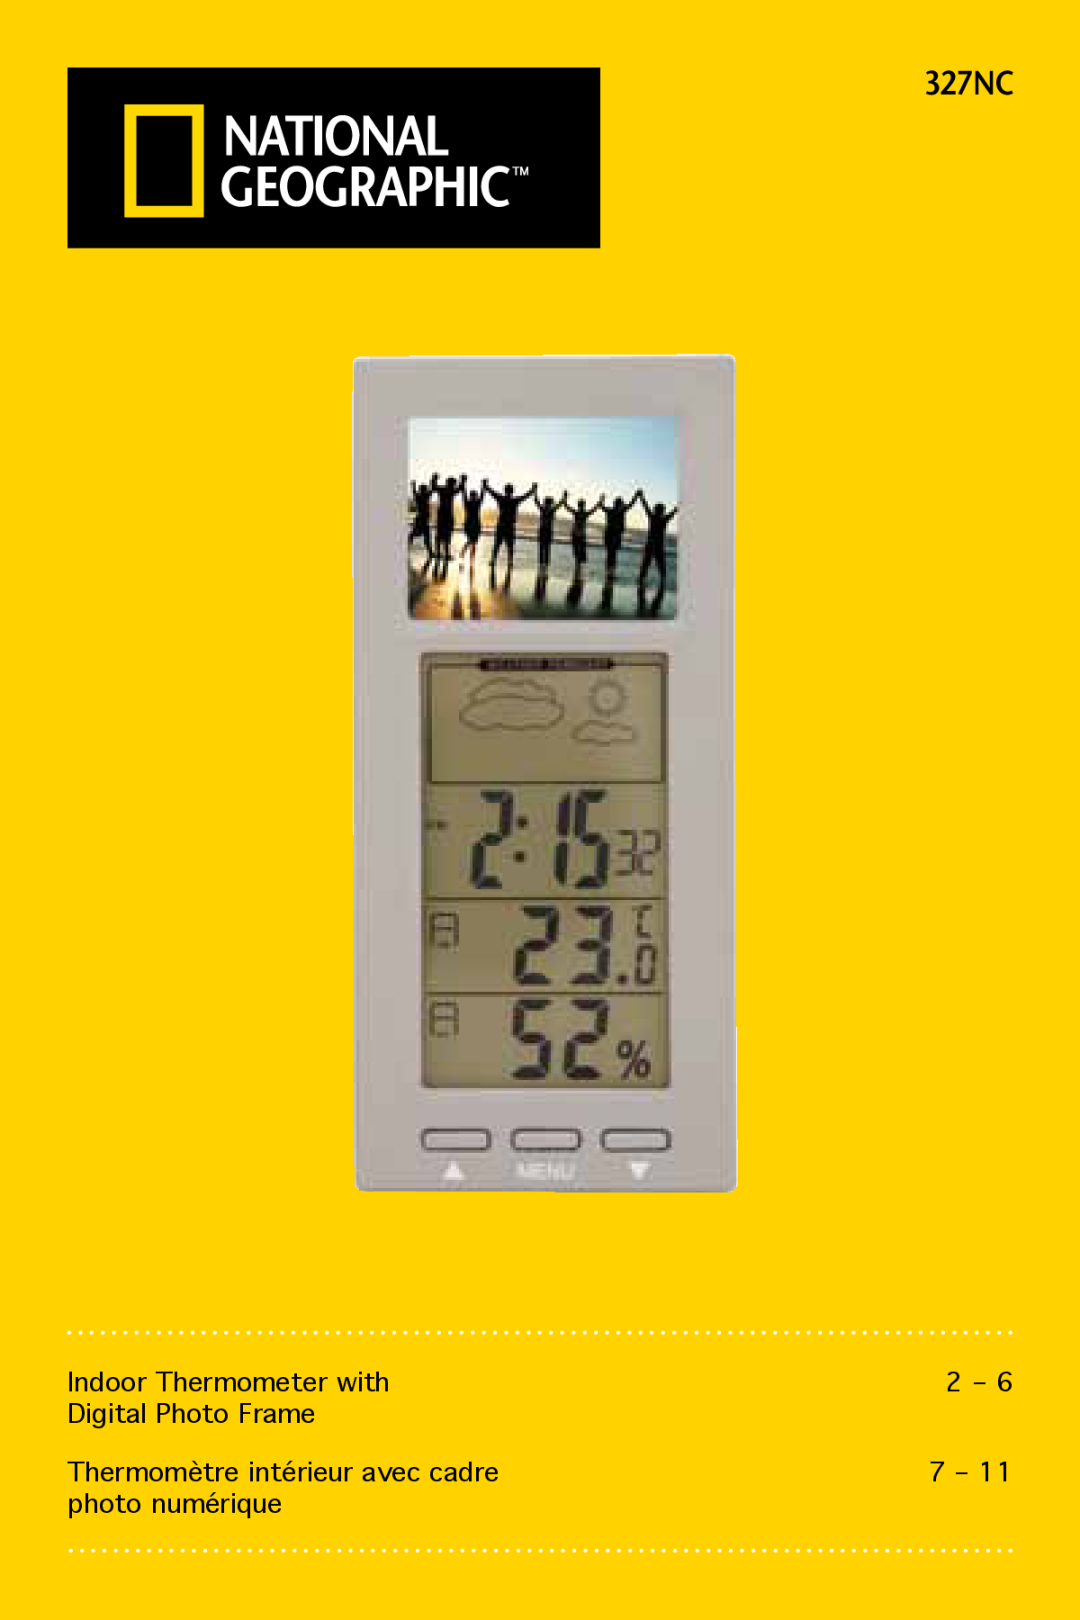 National Geographic 327nc manual 327NC, Indoor Thermometer with, Digital Photo Frame, Thermomètre intérieur avec cadre 